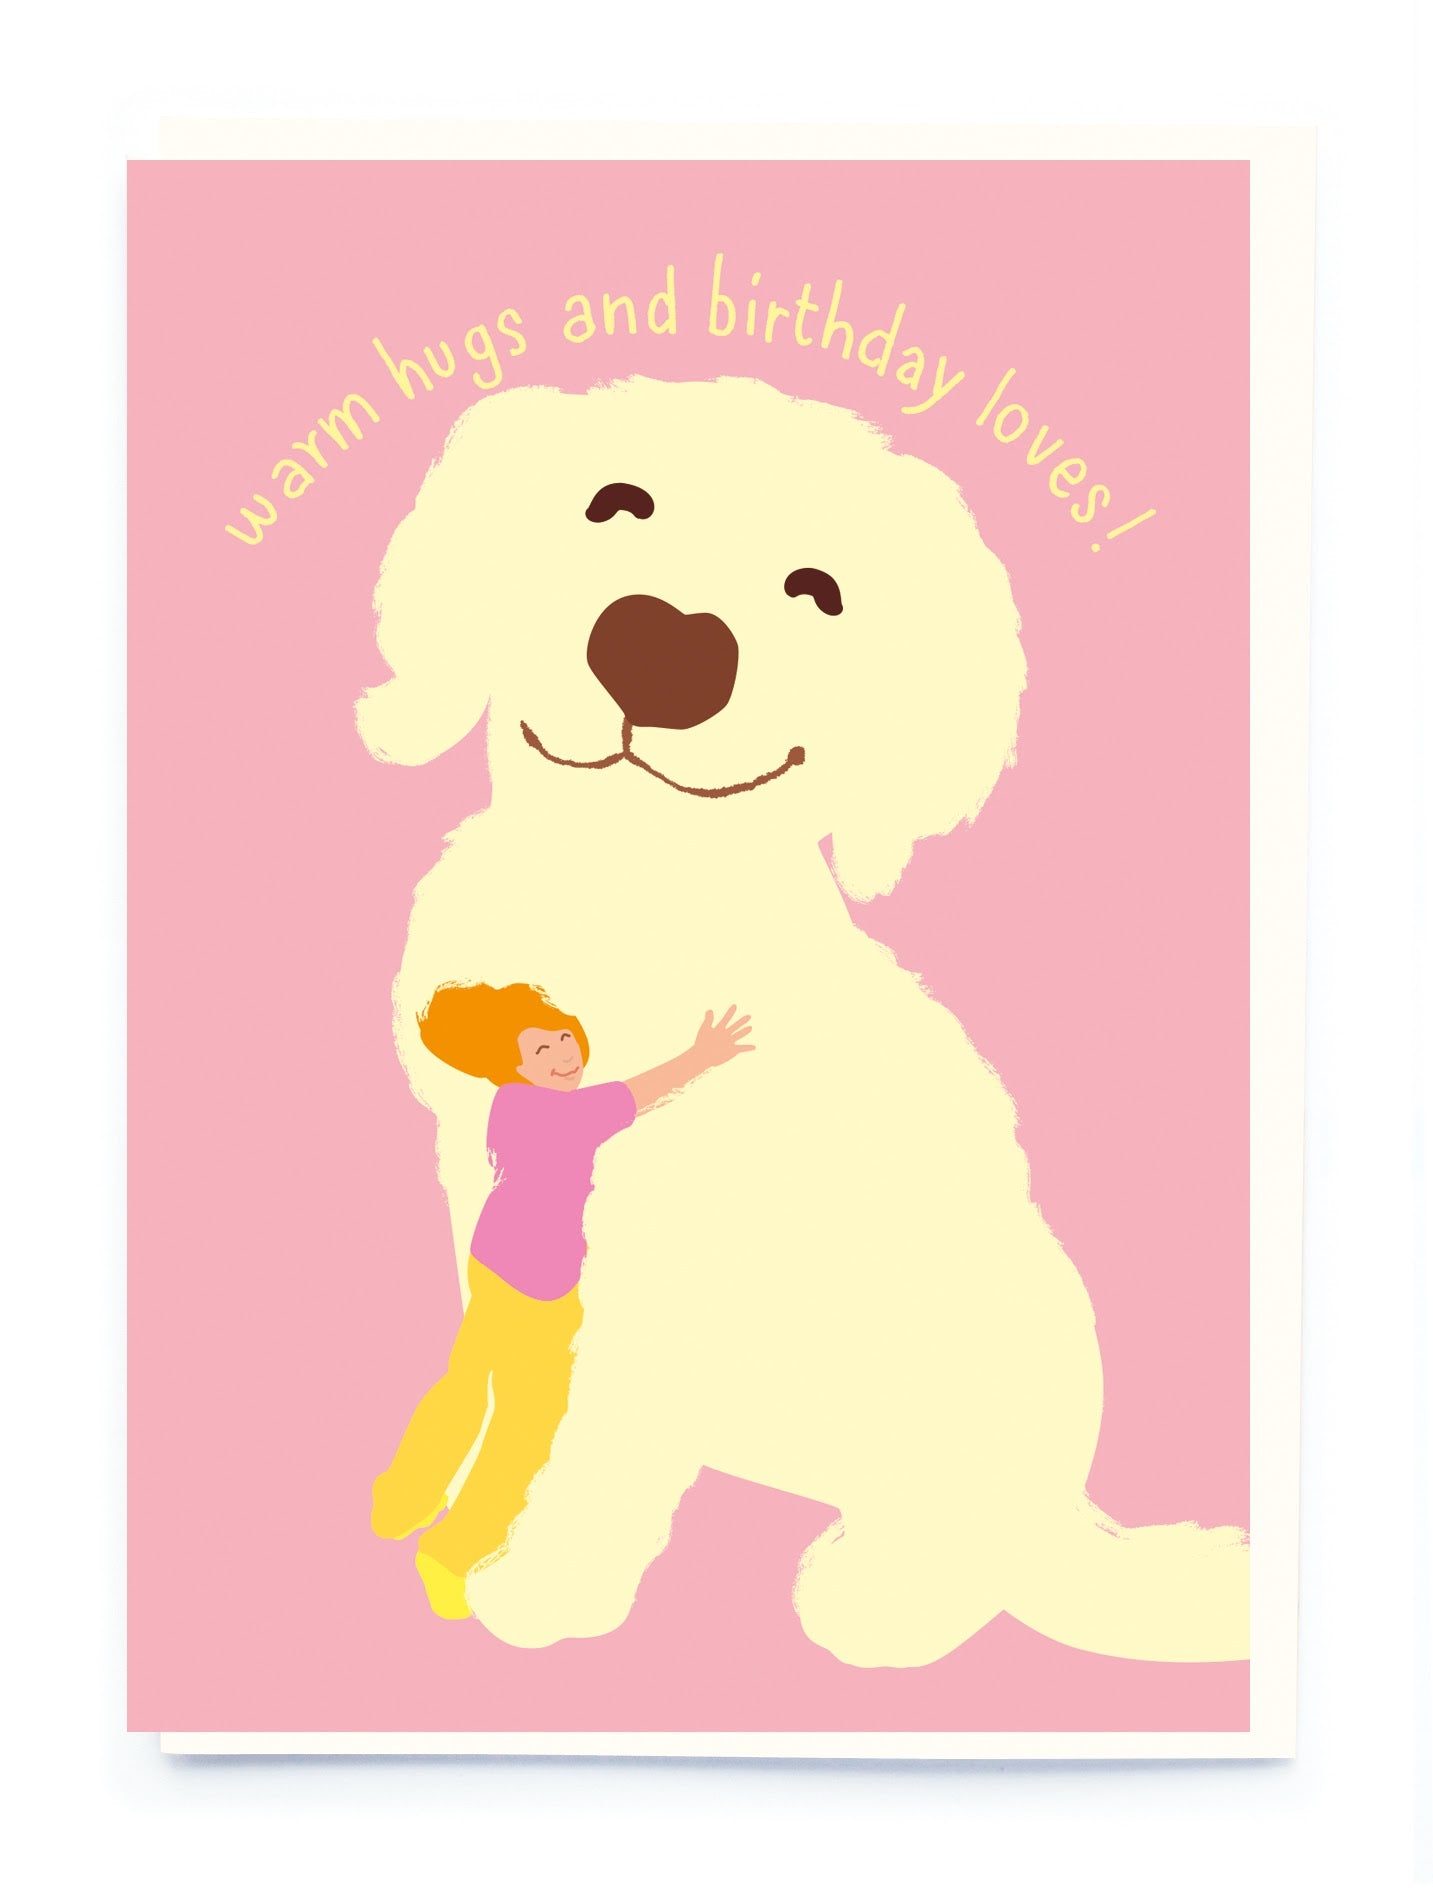 WARM HUGS AND BIRTHDAY LOVES! (DOG) | CARD BY NOI